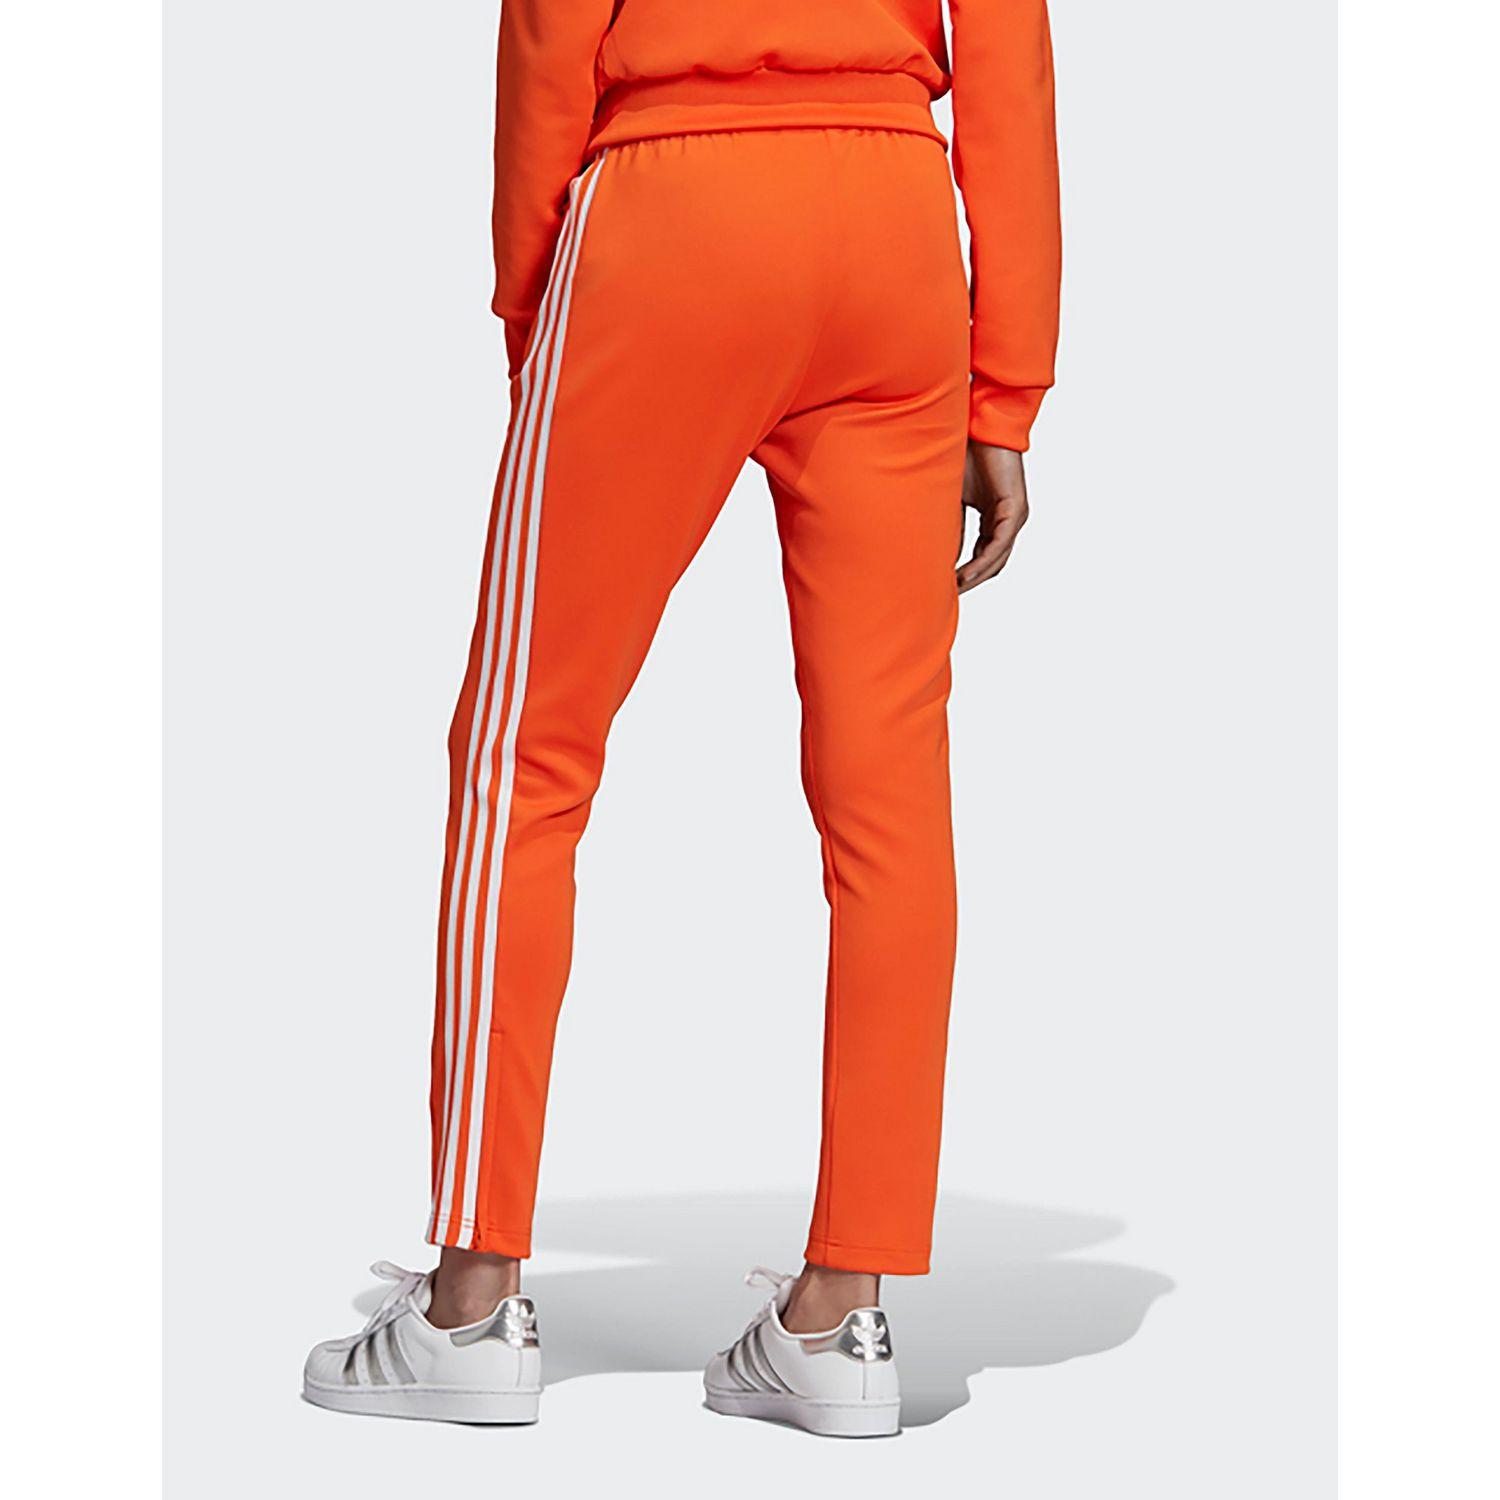 adidas Originals Synthetic Sst Tracksuit Bottom in Orange - Lyst